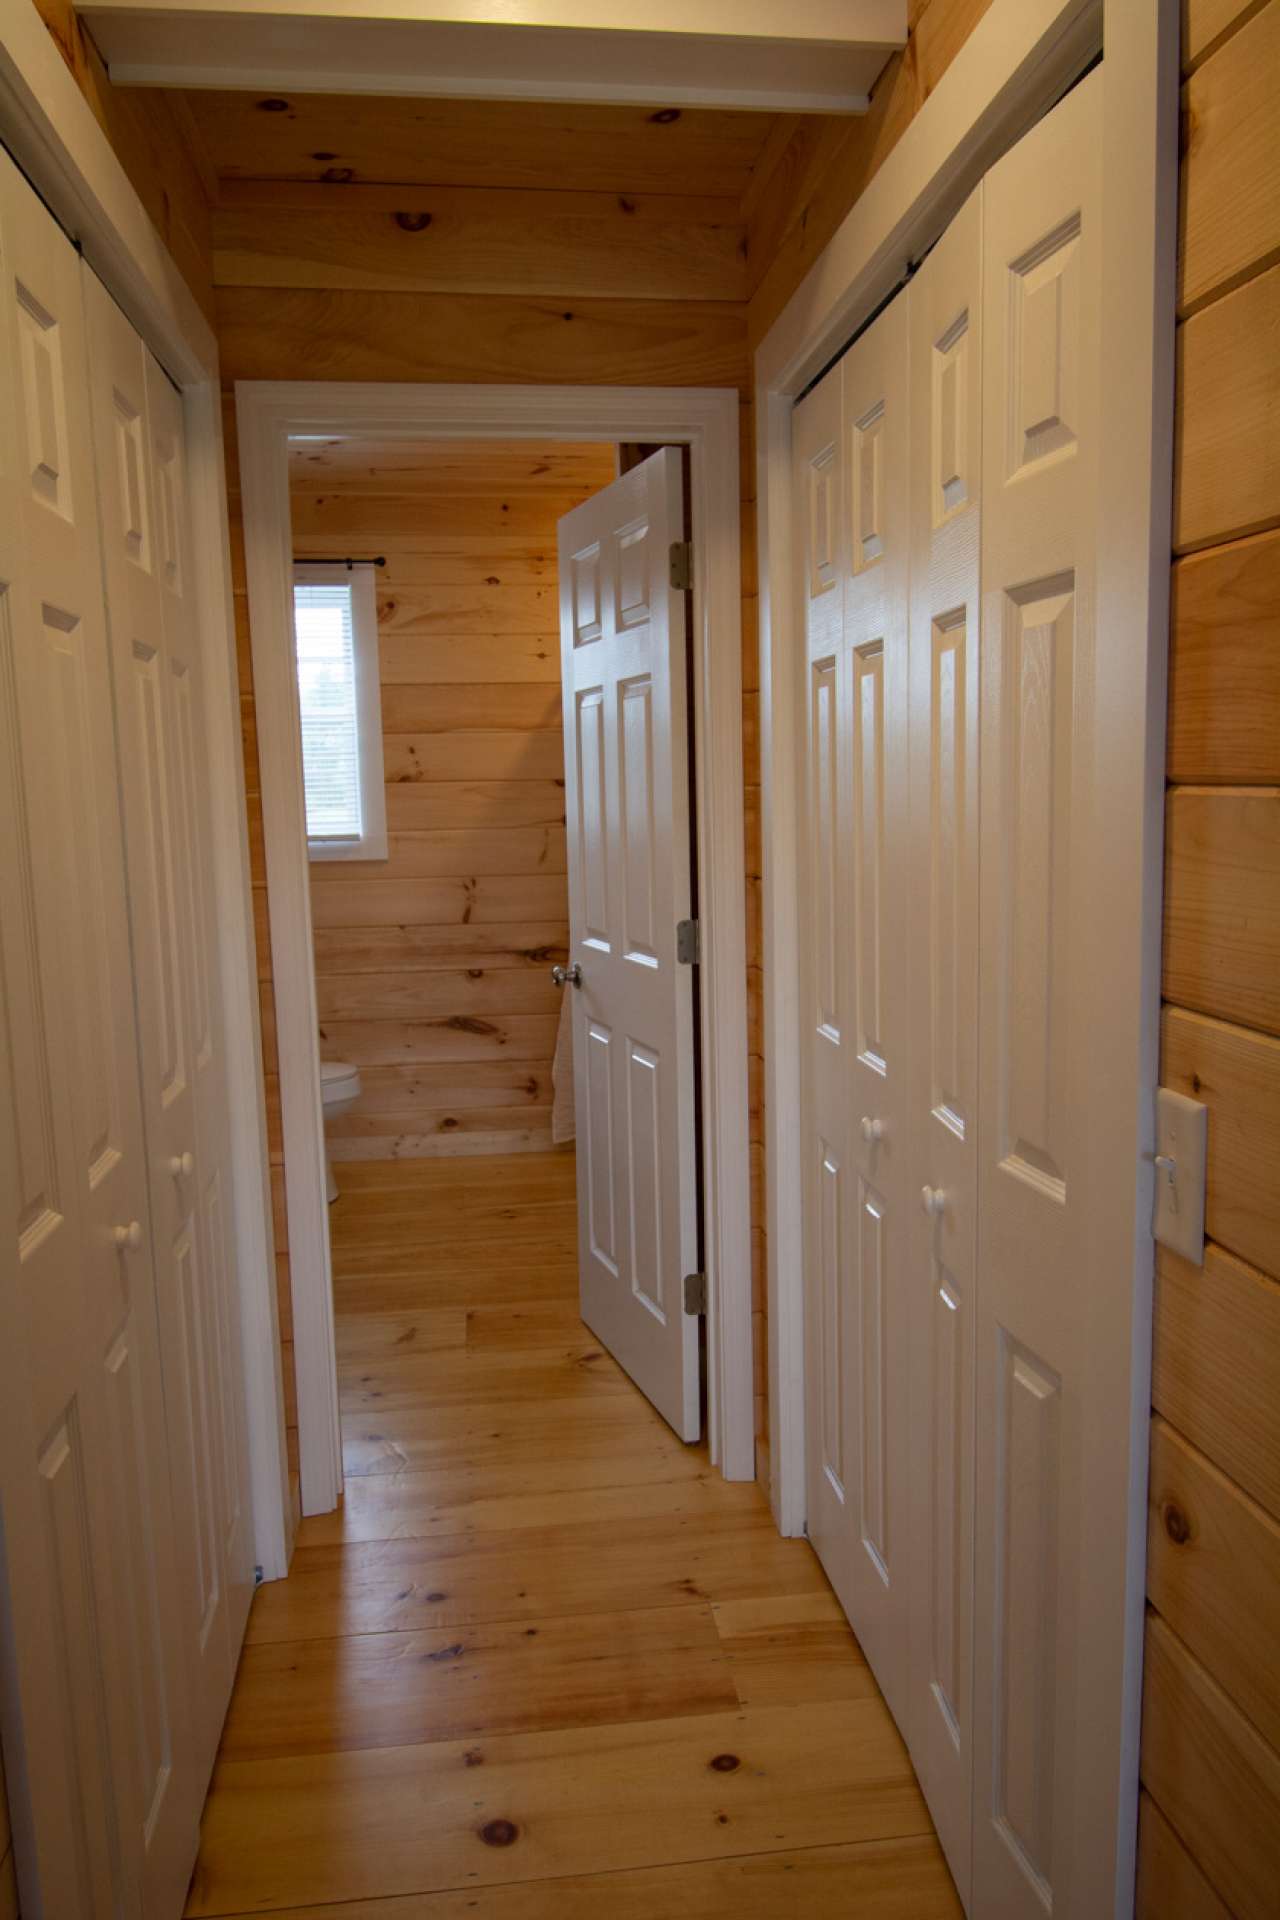 Second level hallway to bath with closets on each side.